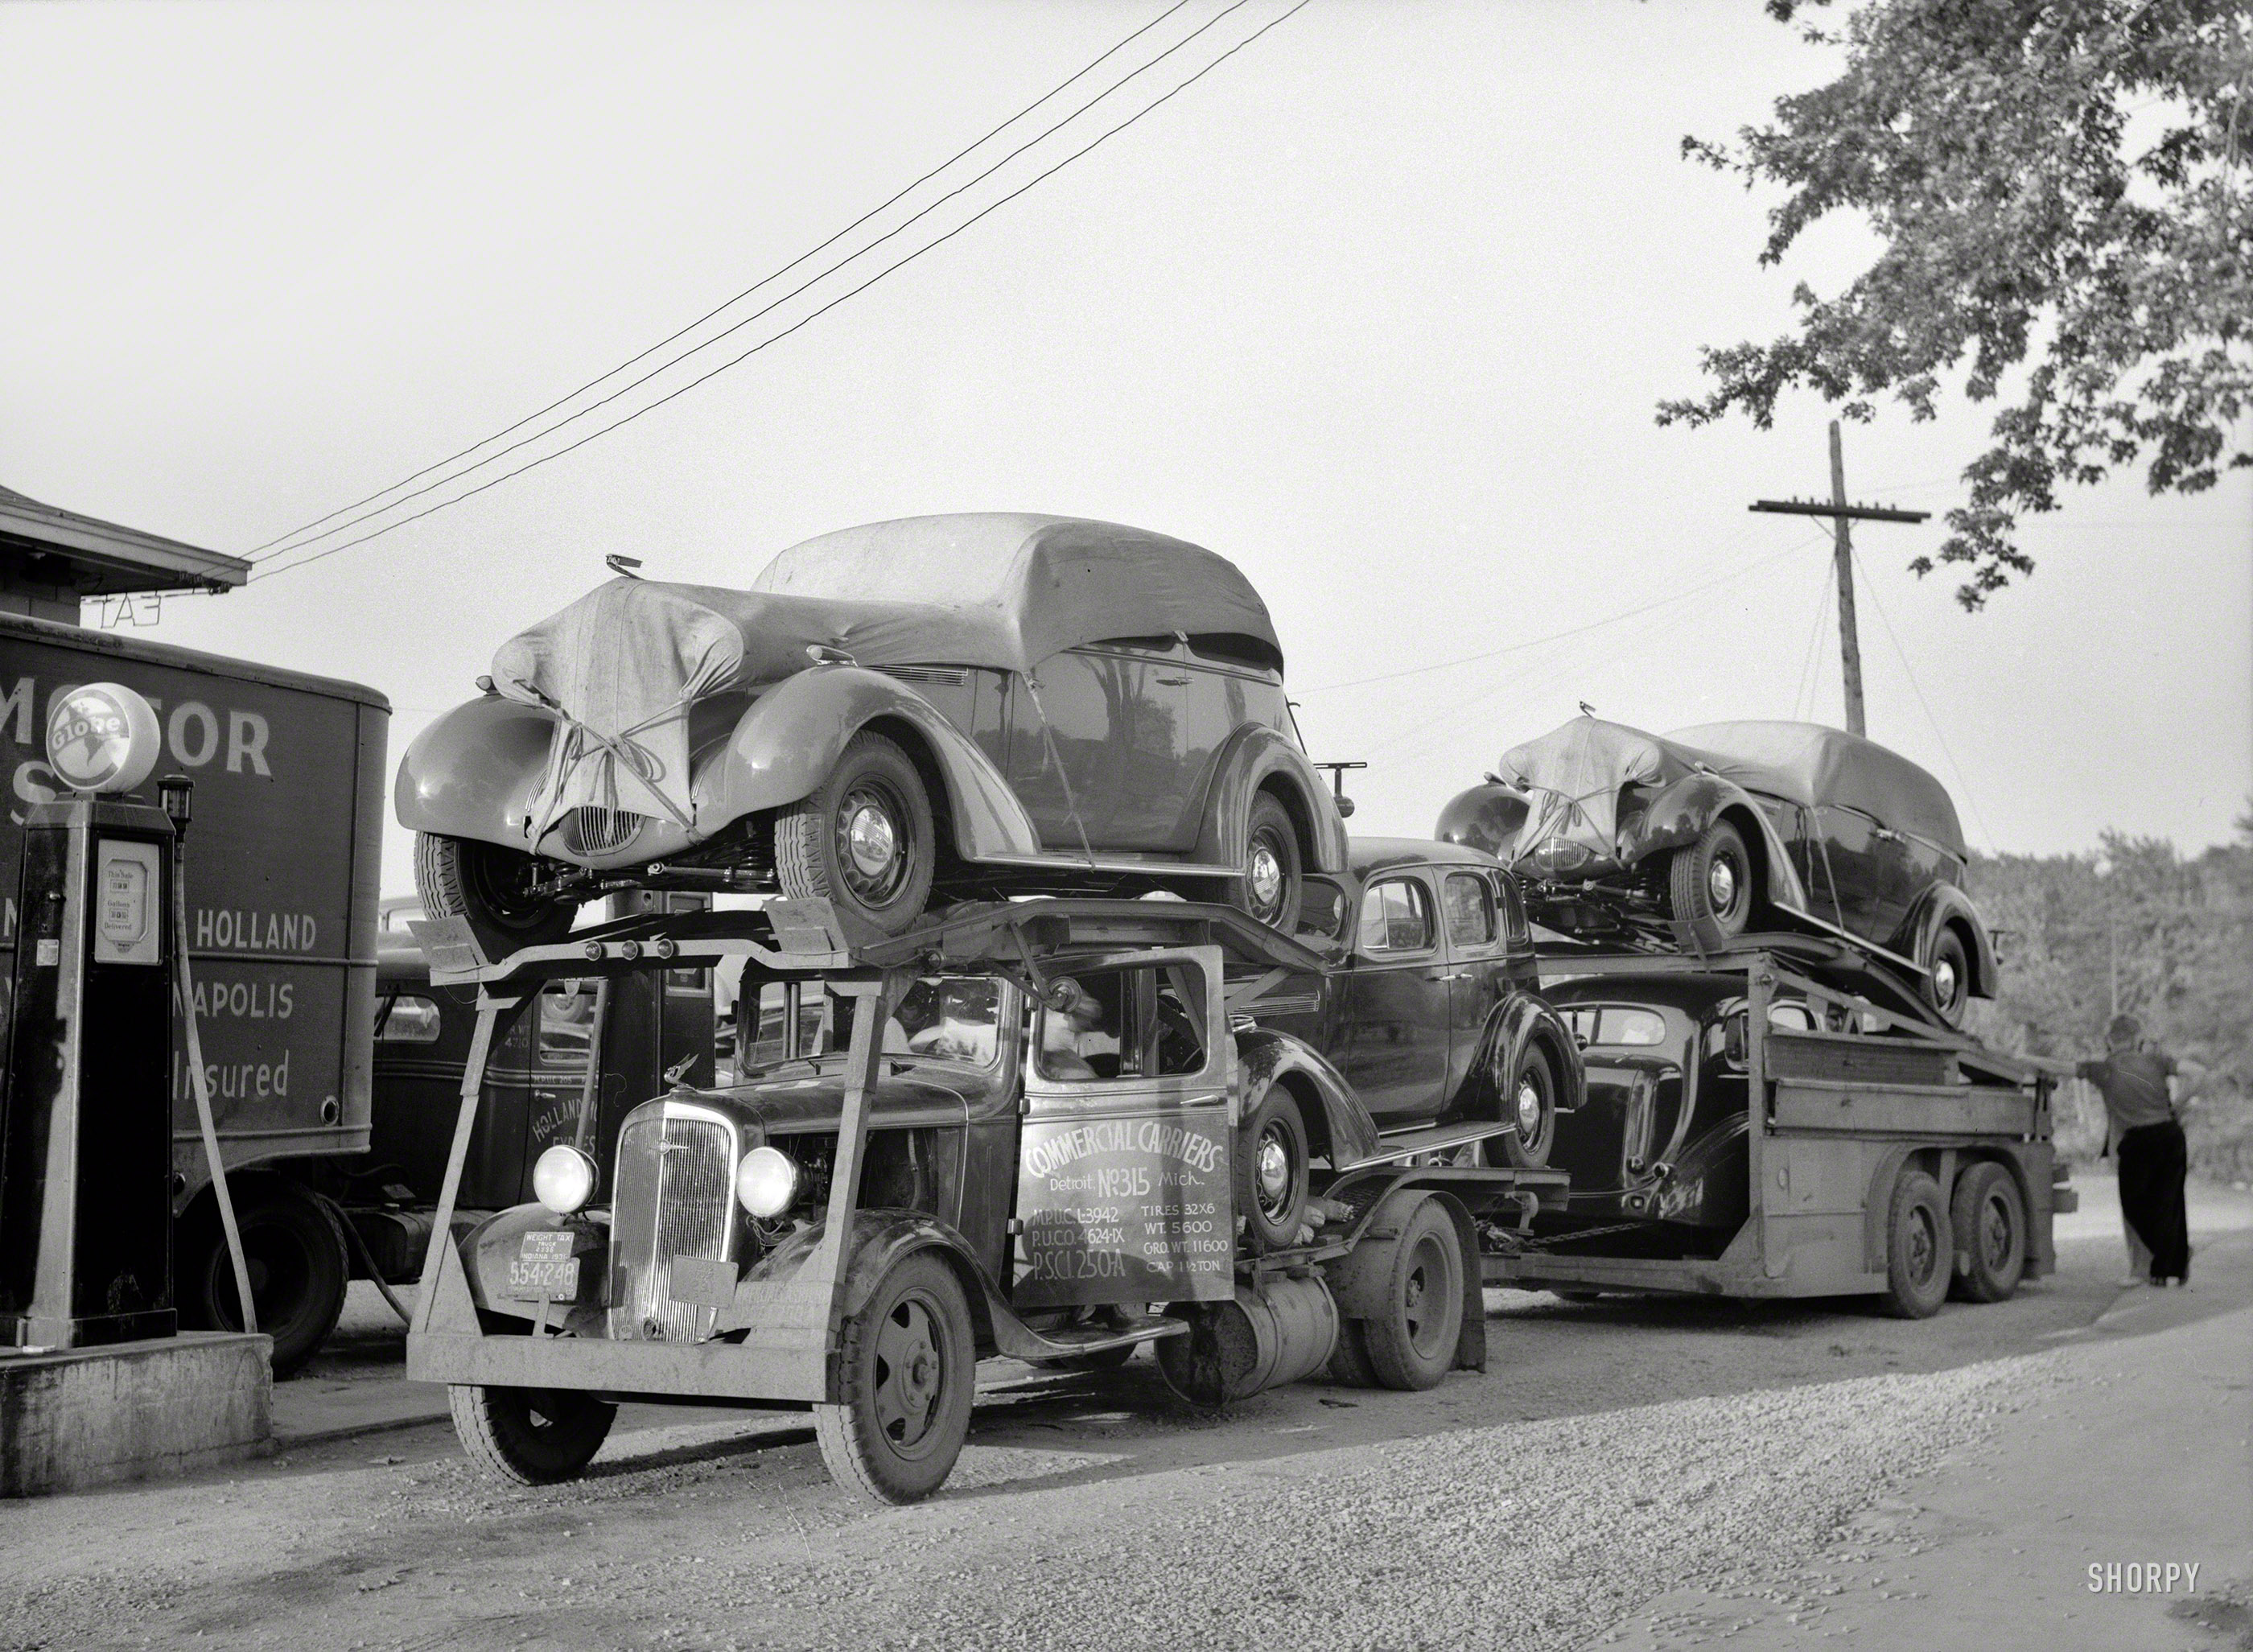 May 1936, somewhere in Indiana. "Auto transport at gas station." Everyone has a nice hood ornament here. Photo by Carl Mydans. View full size.